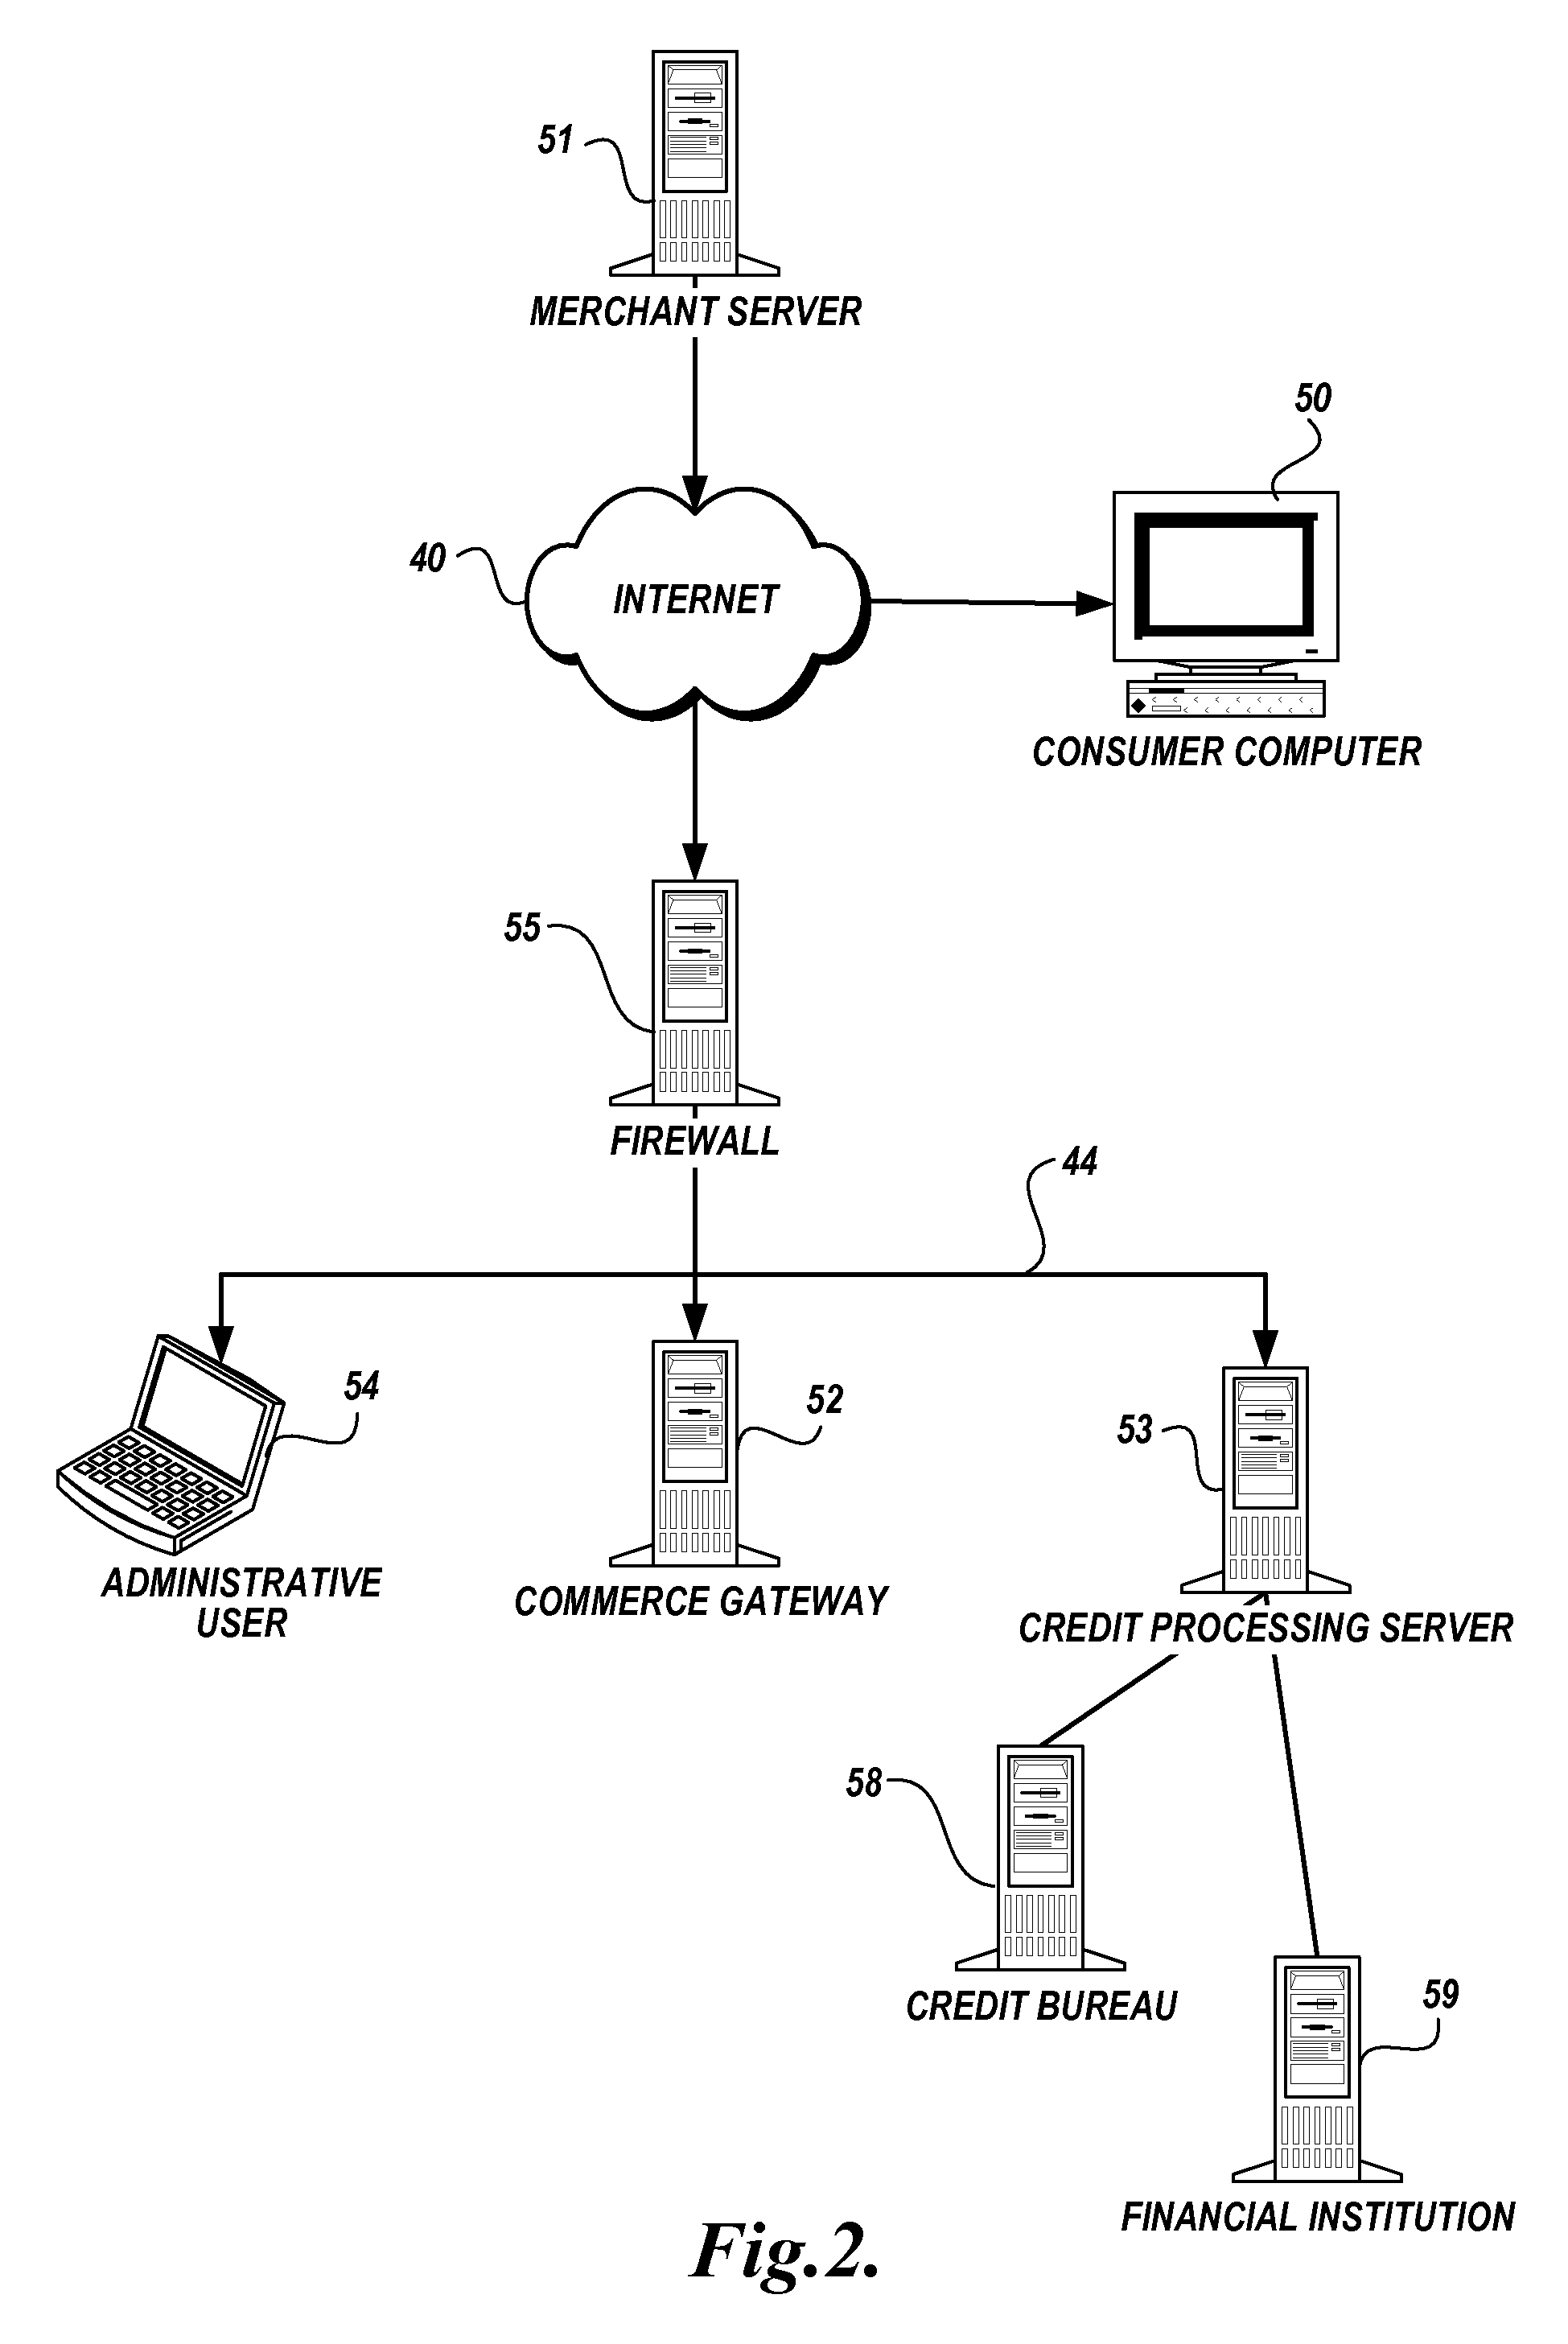 Method and apparatus for ordering goods, services and content over an internetwork using a virtual payment account